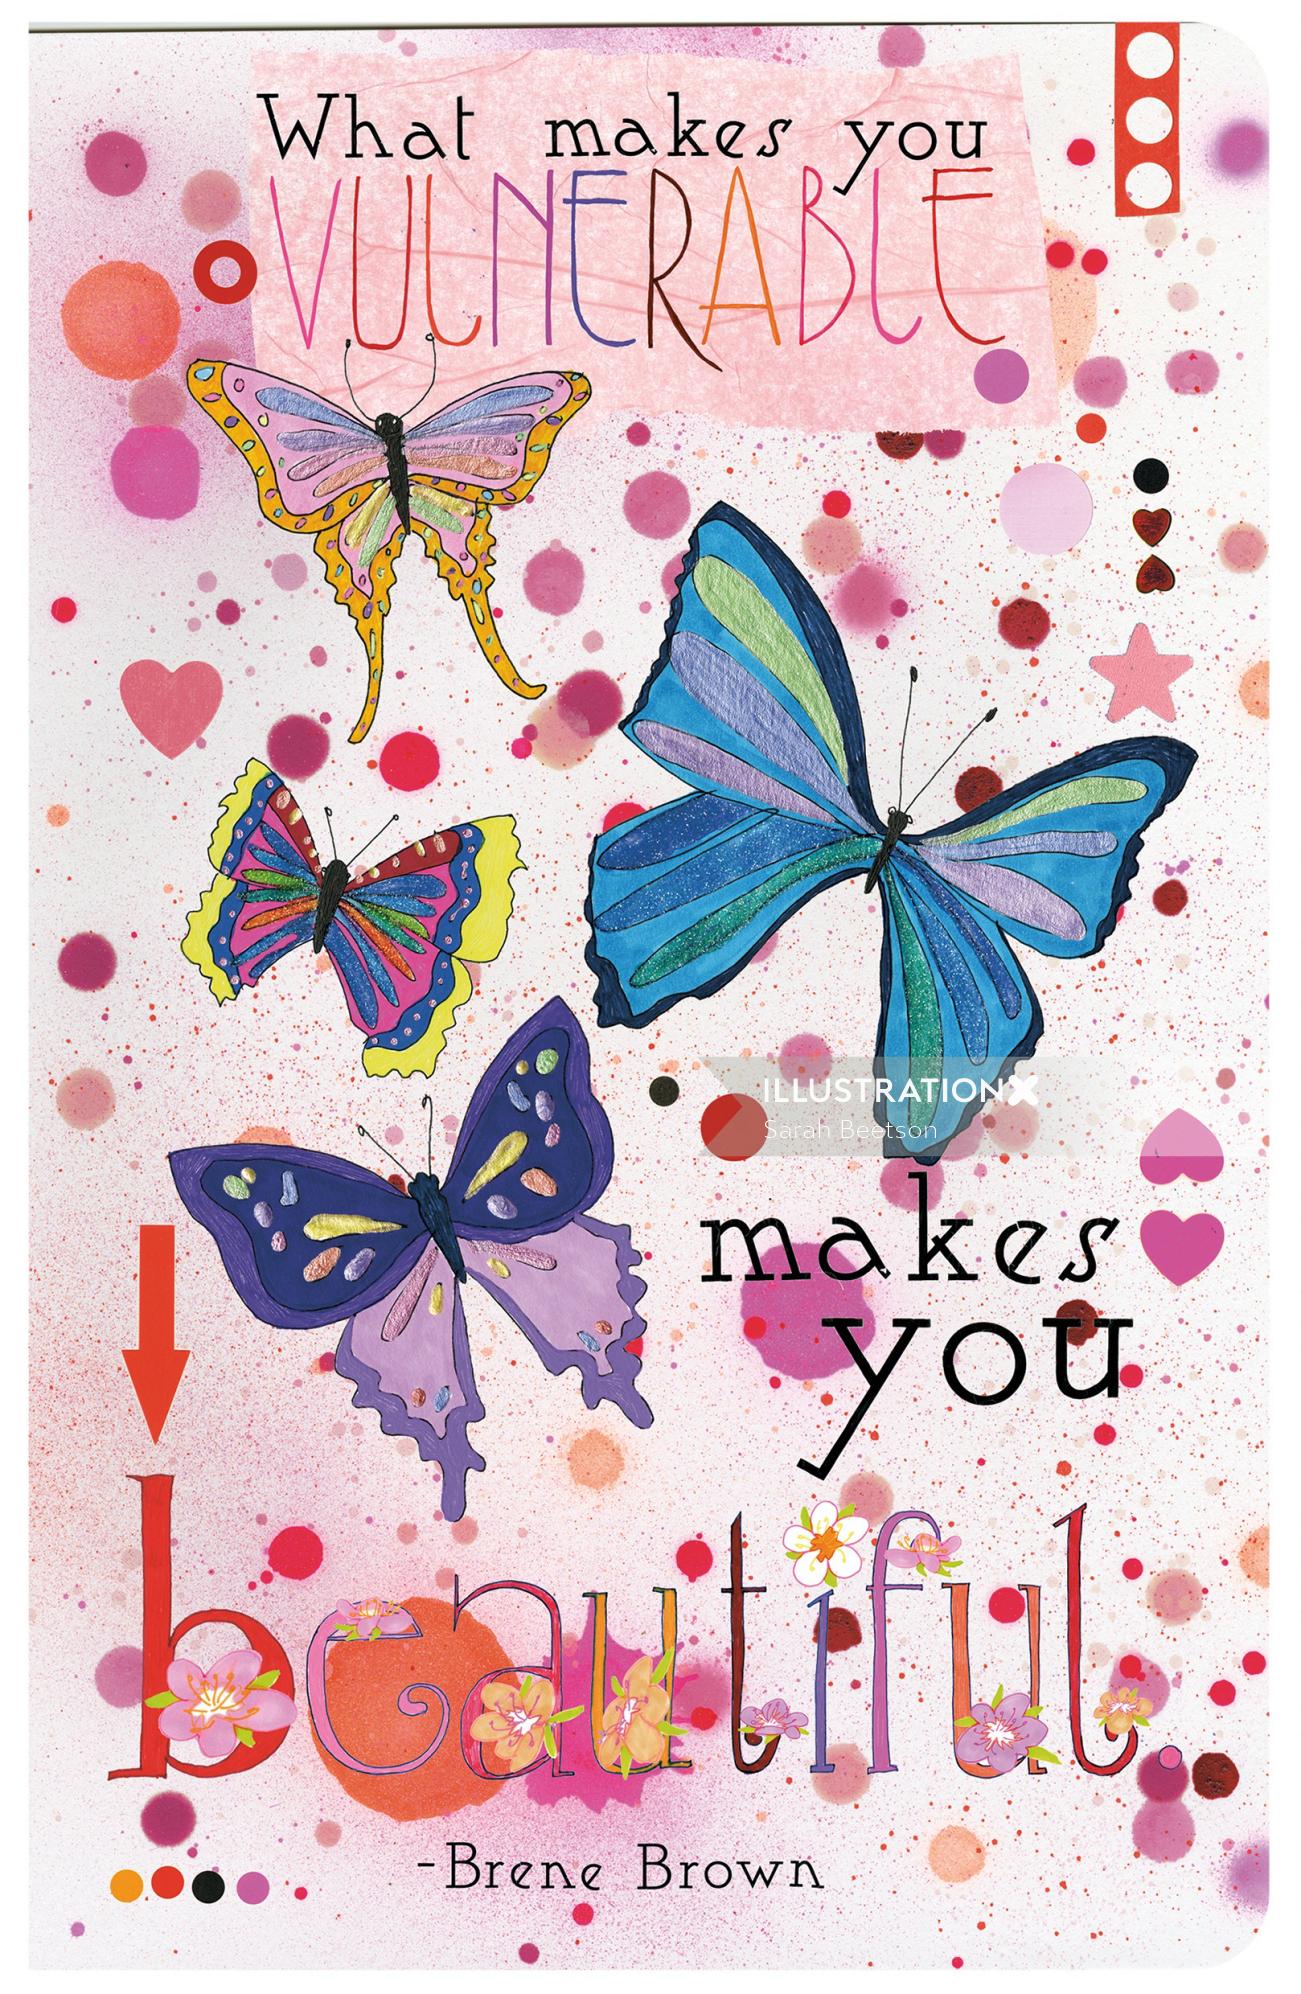 Butterflies illustration by Sarah Beetson